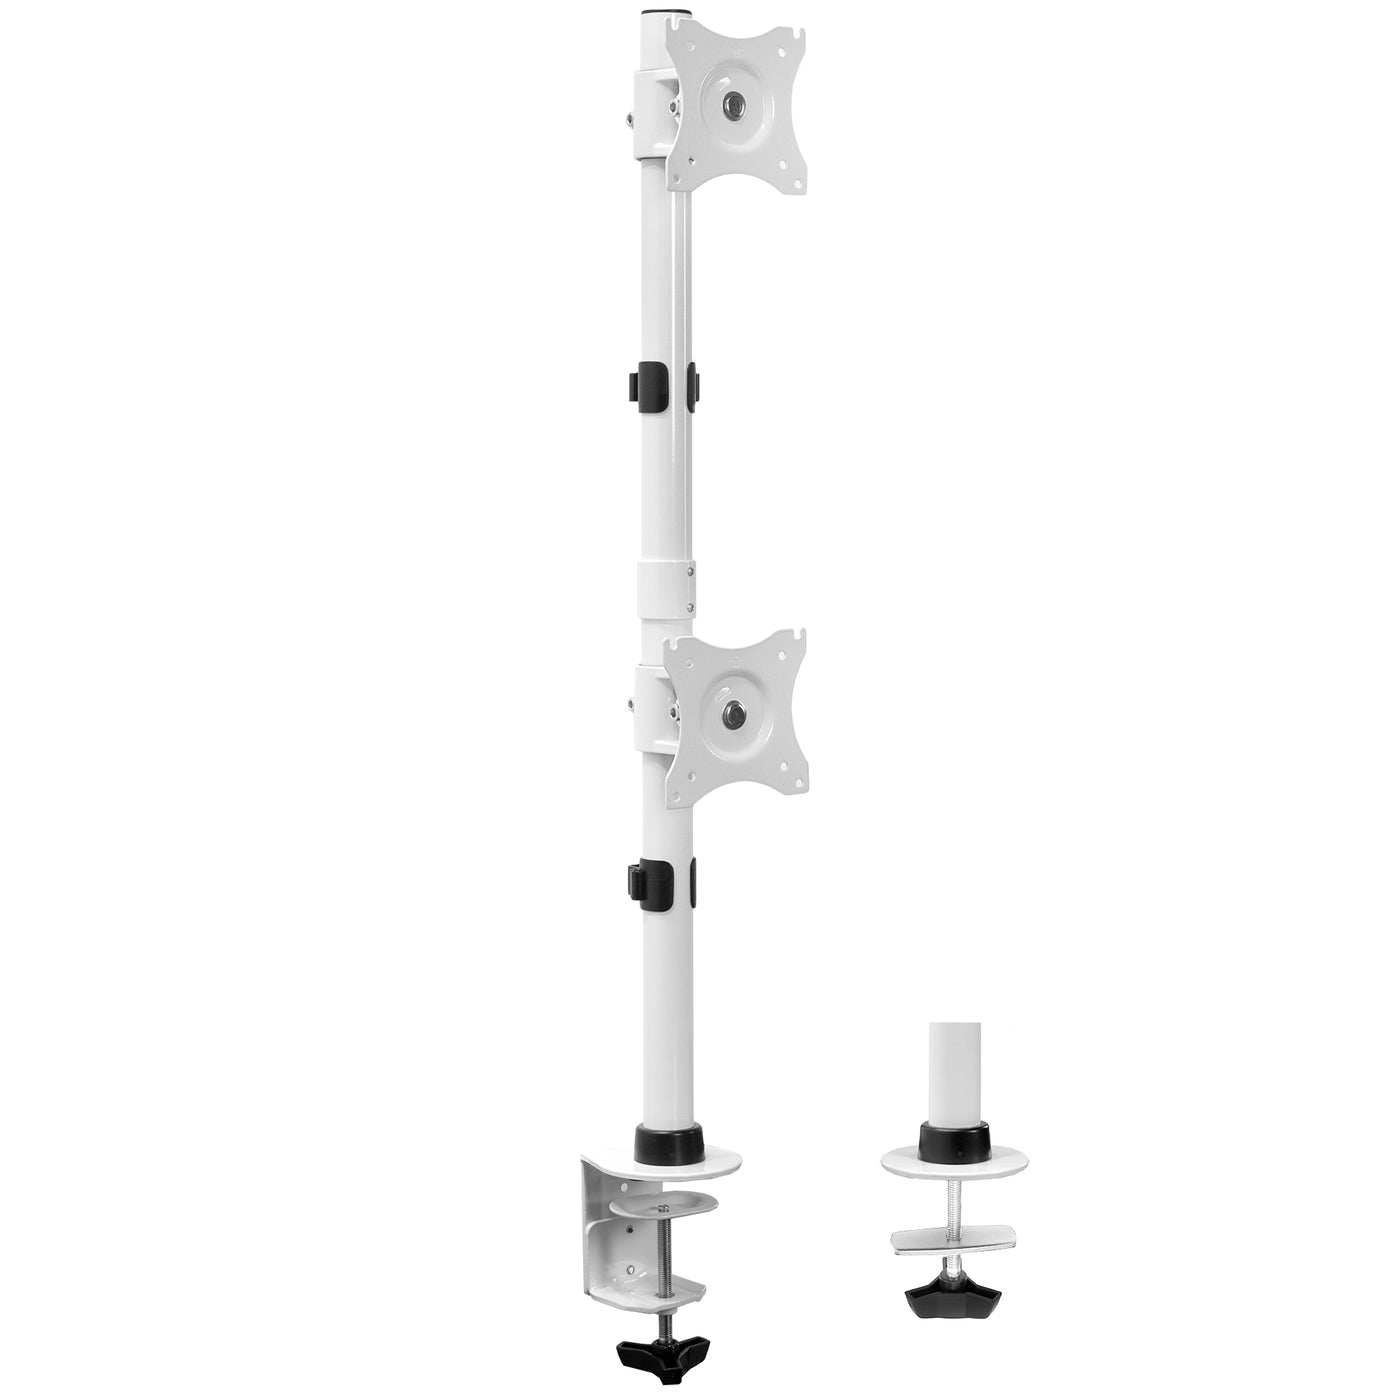 Dual Monitor Arm Fully Adjustable with 3-Section Extended Design for Office